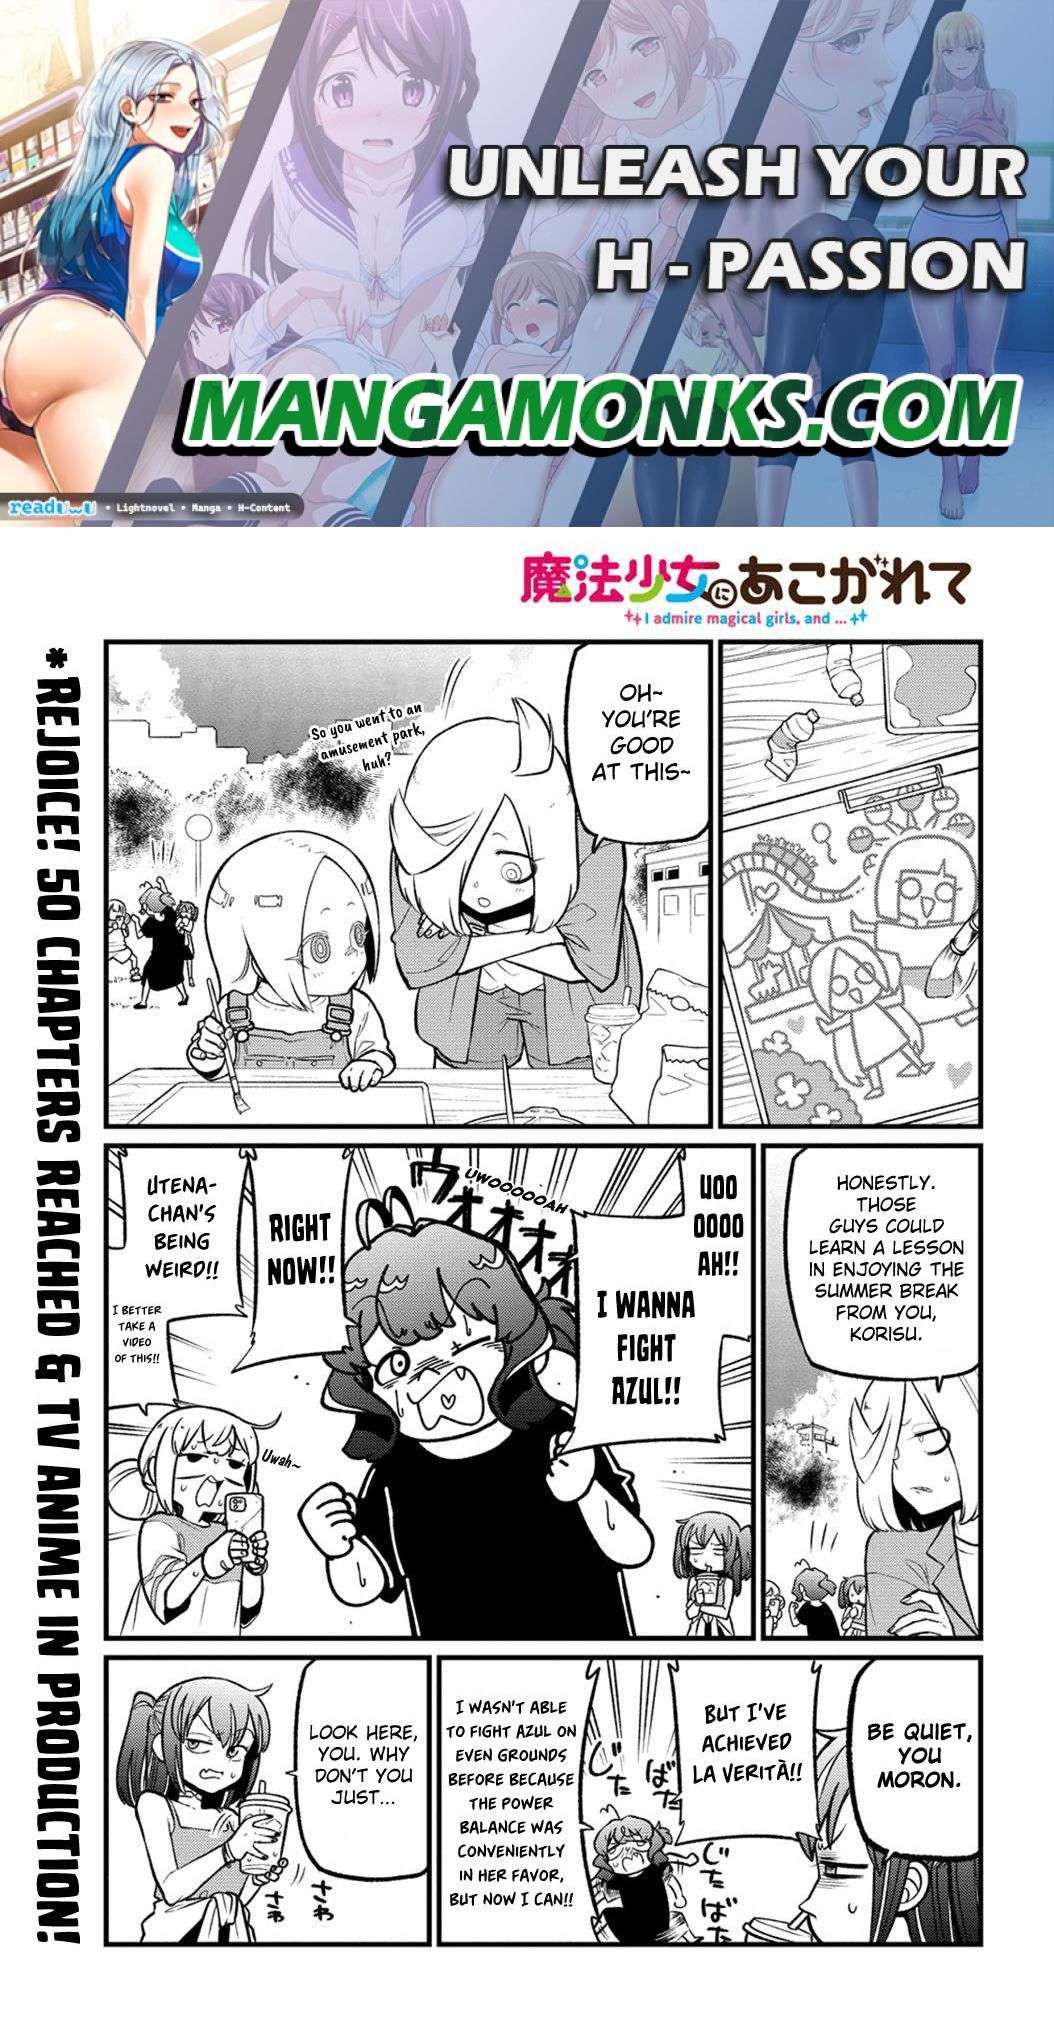 Gushing over Magical Girls - chapter 50 - #1